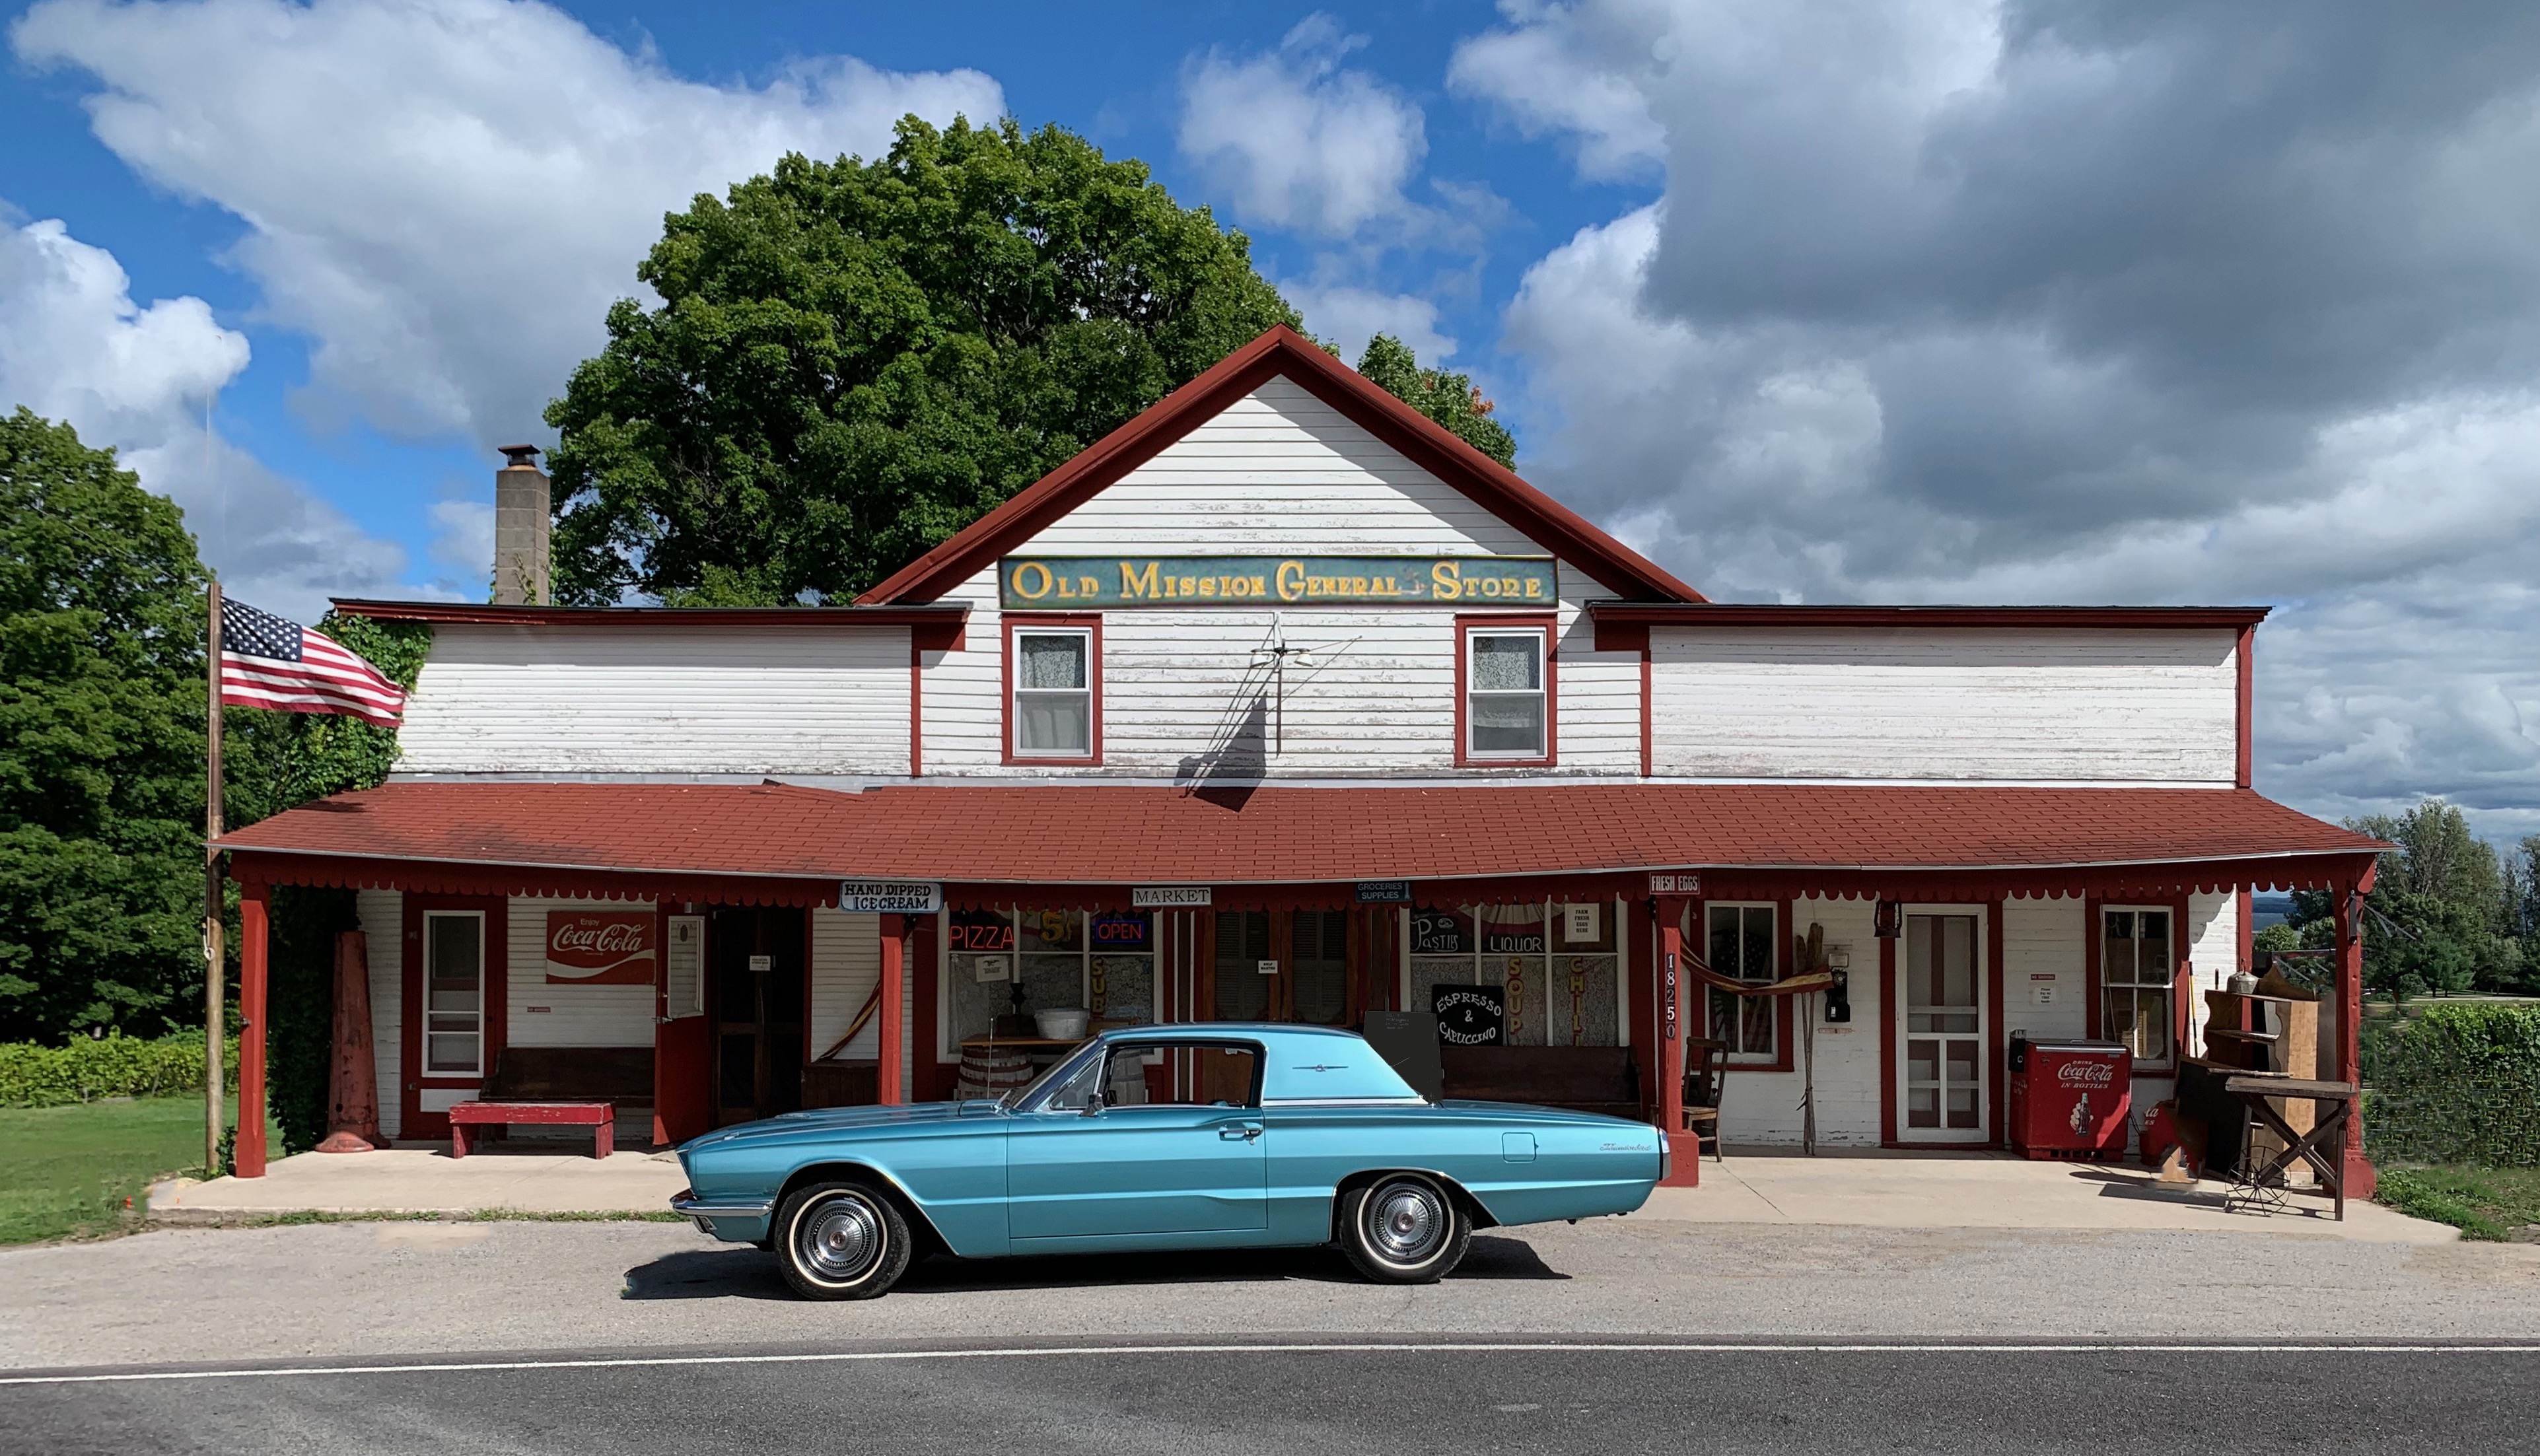 66 T-Bird Old Mission General Store.jpg